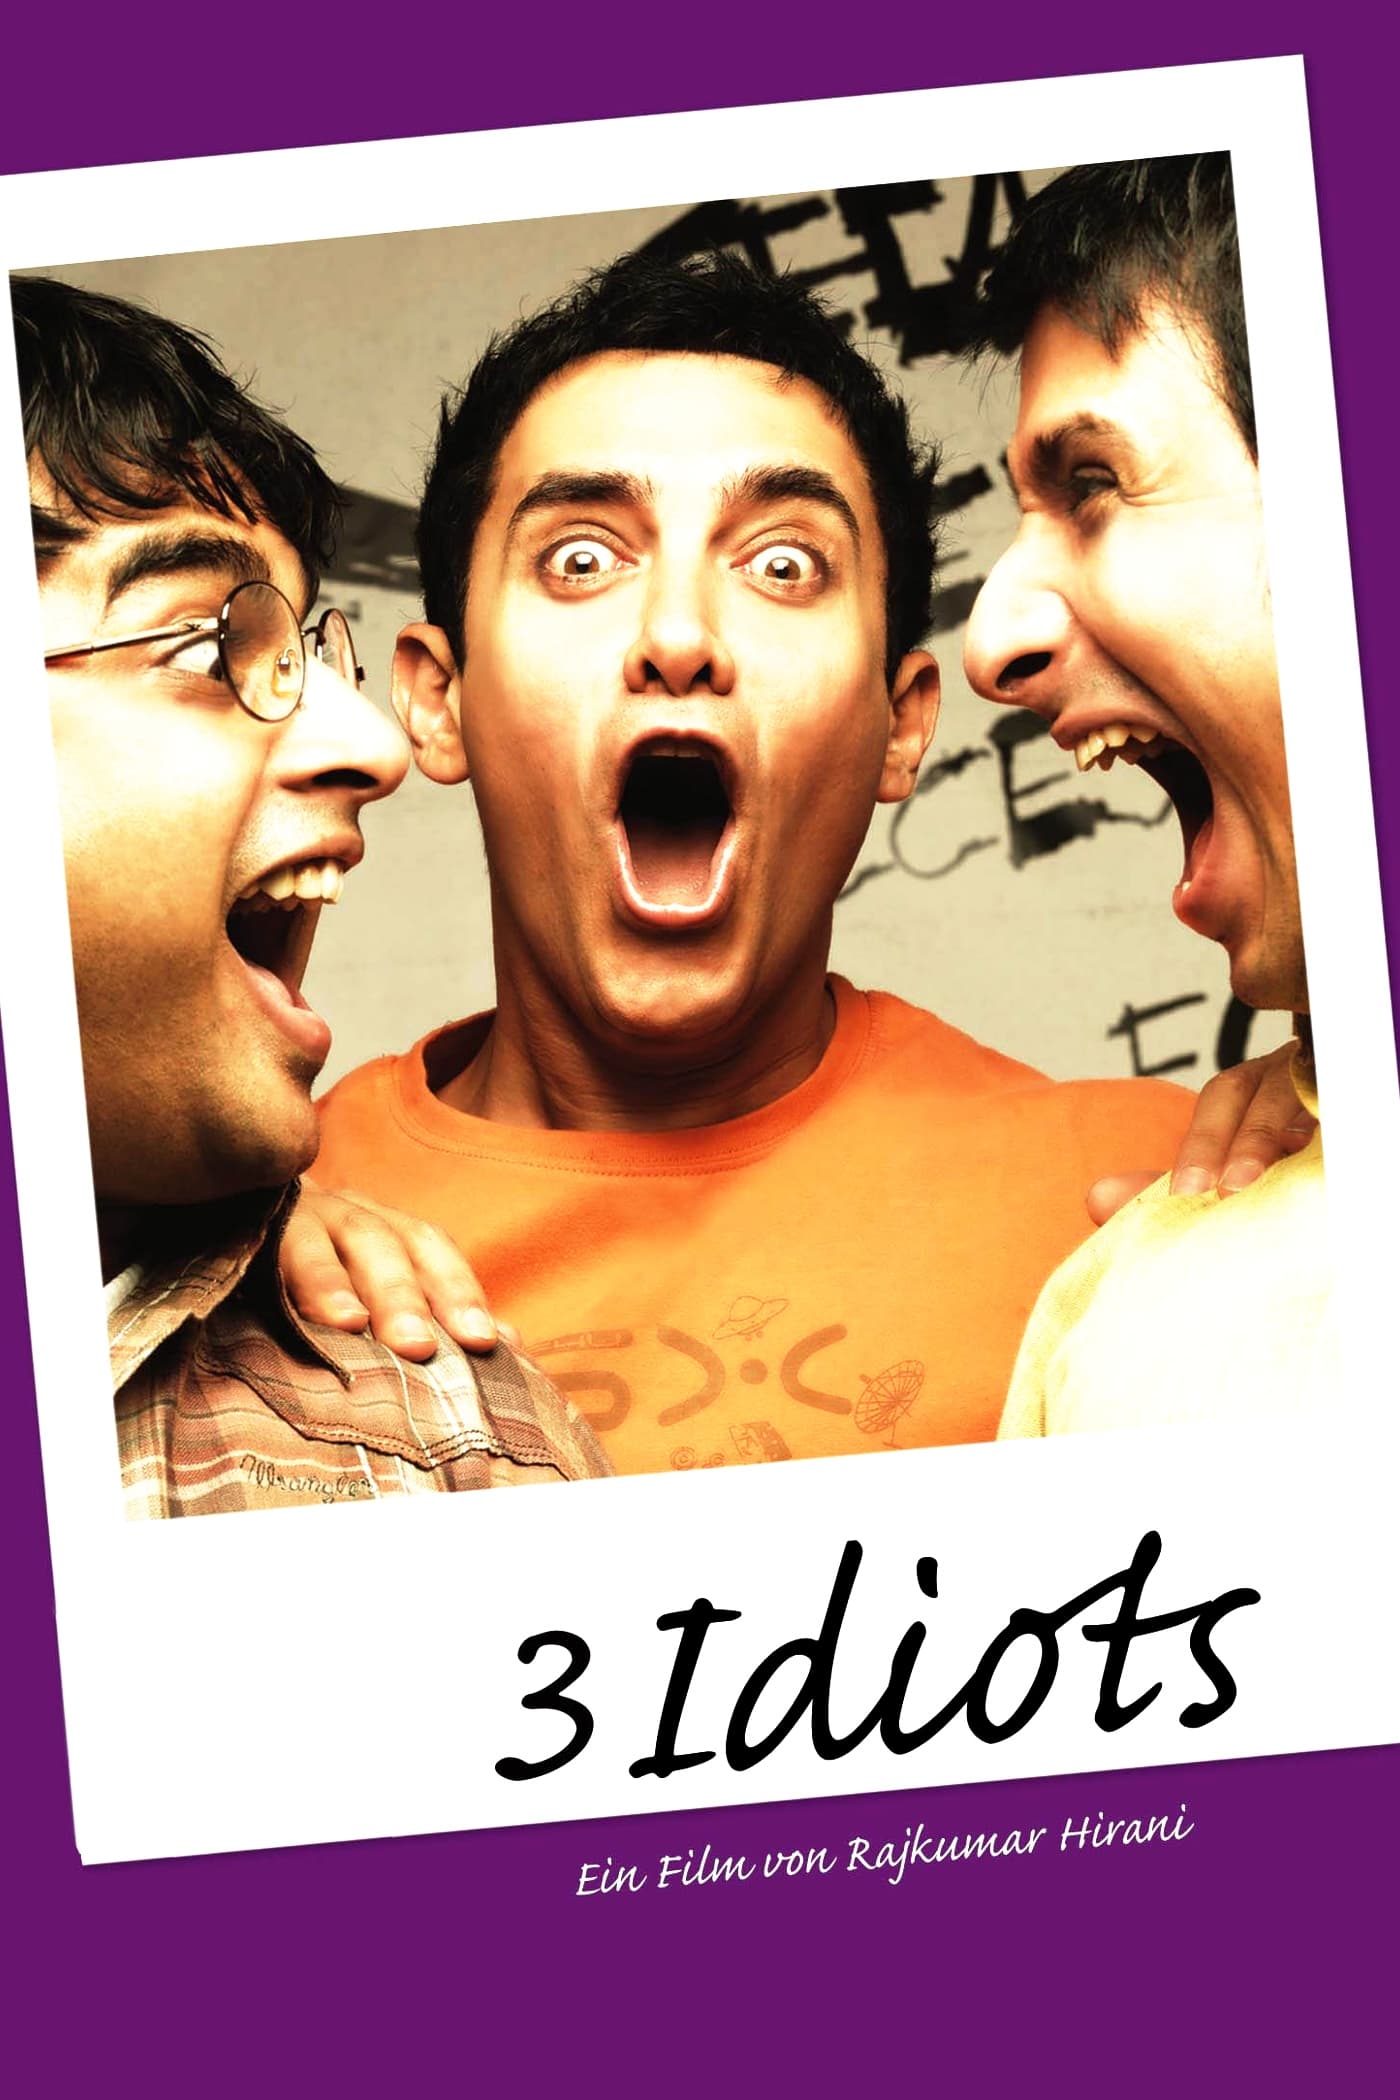 3 idiots movie review for exam